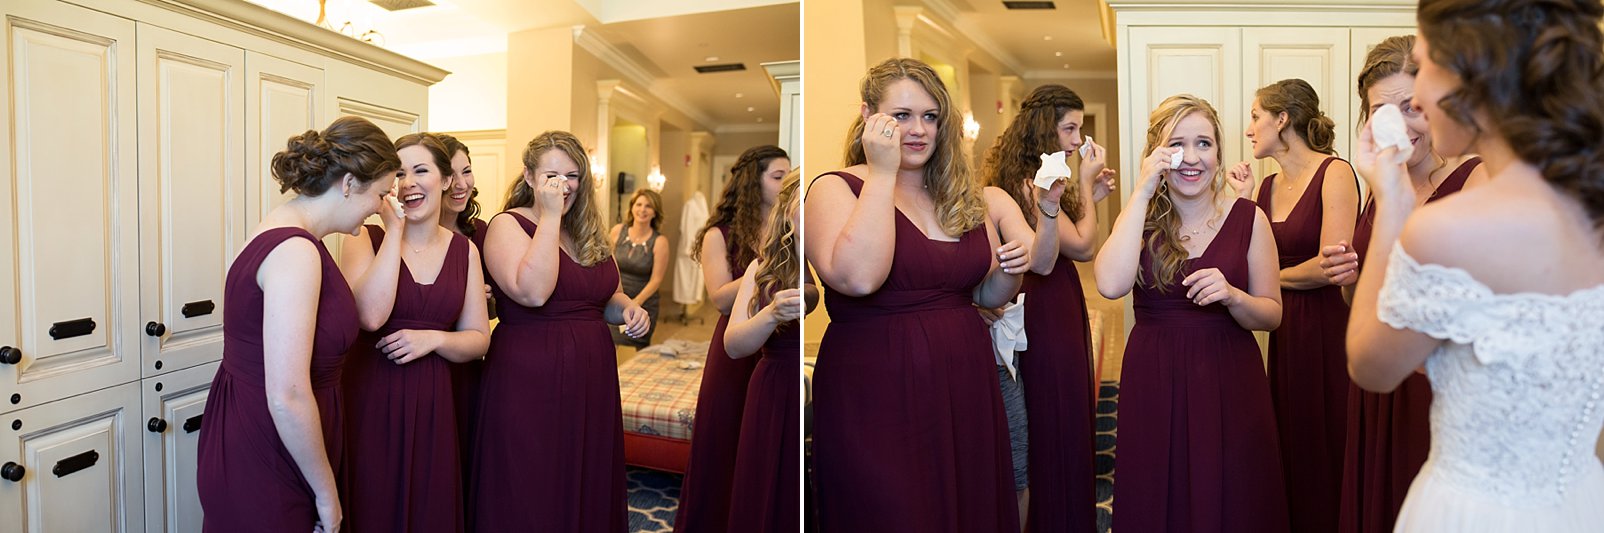 bridesmaids crying after seeing bride